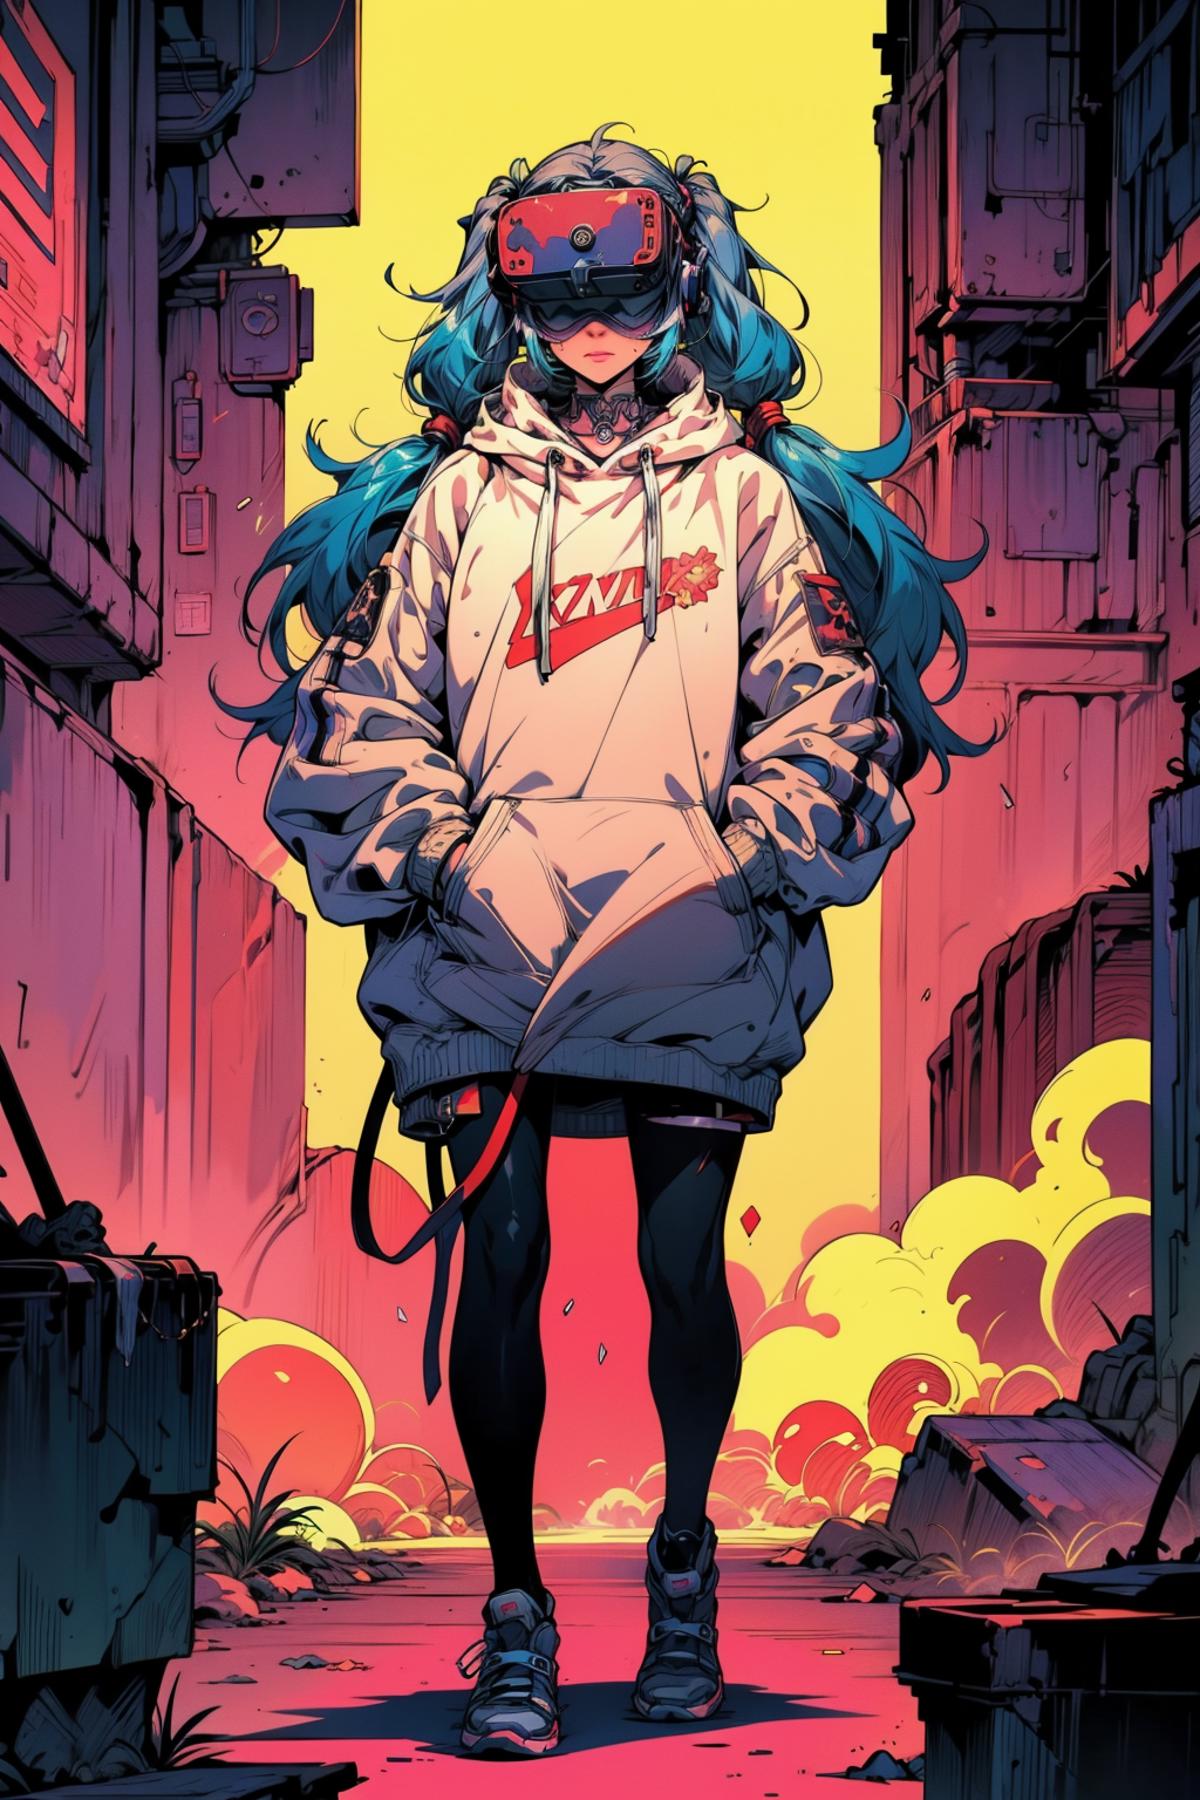 A blue haired anime character in a white hoodie standing in a city alley.